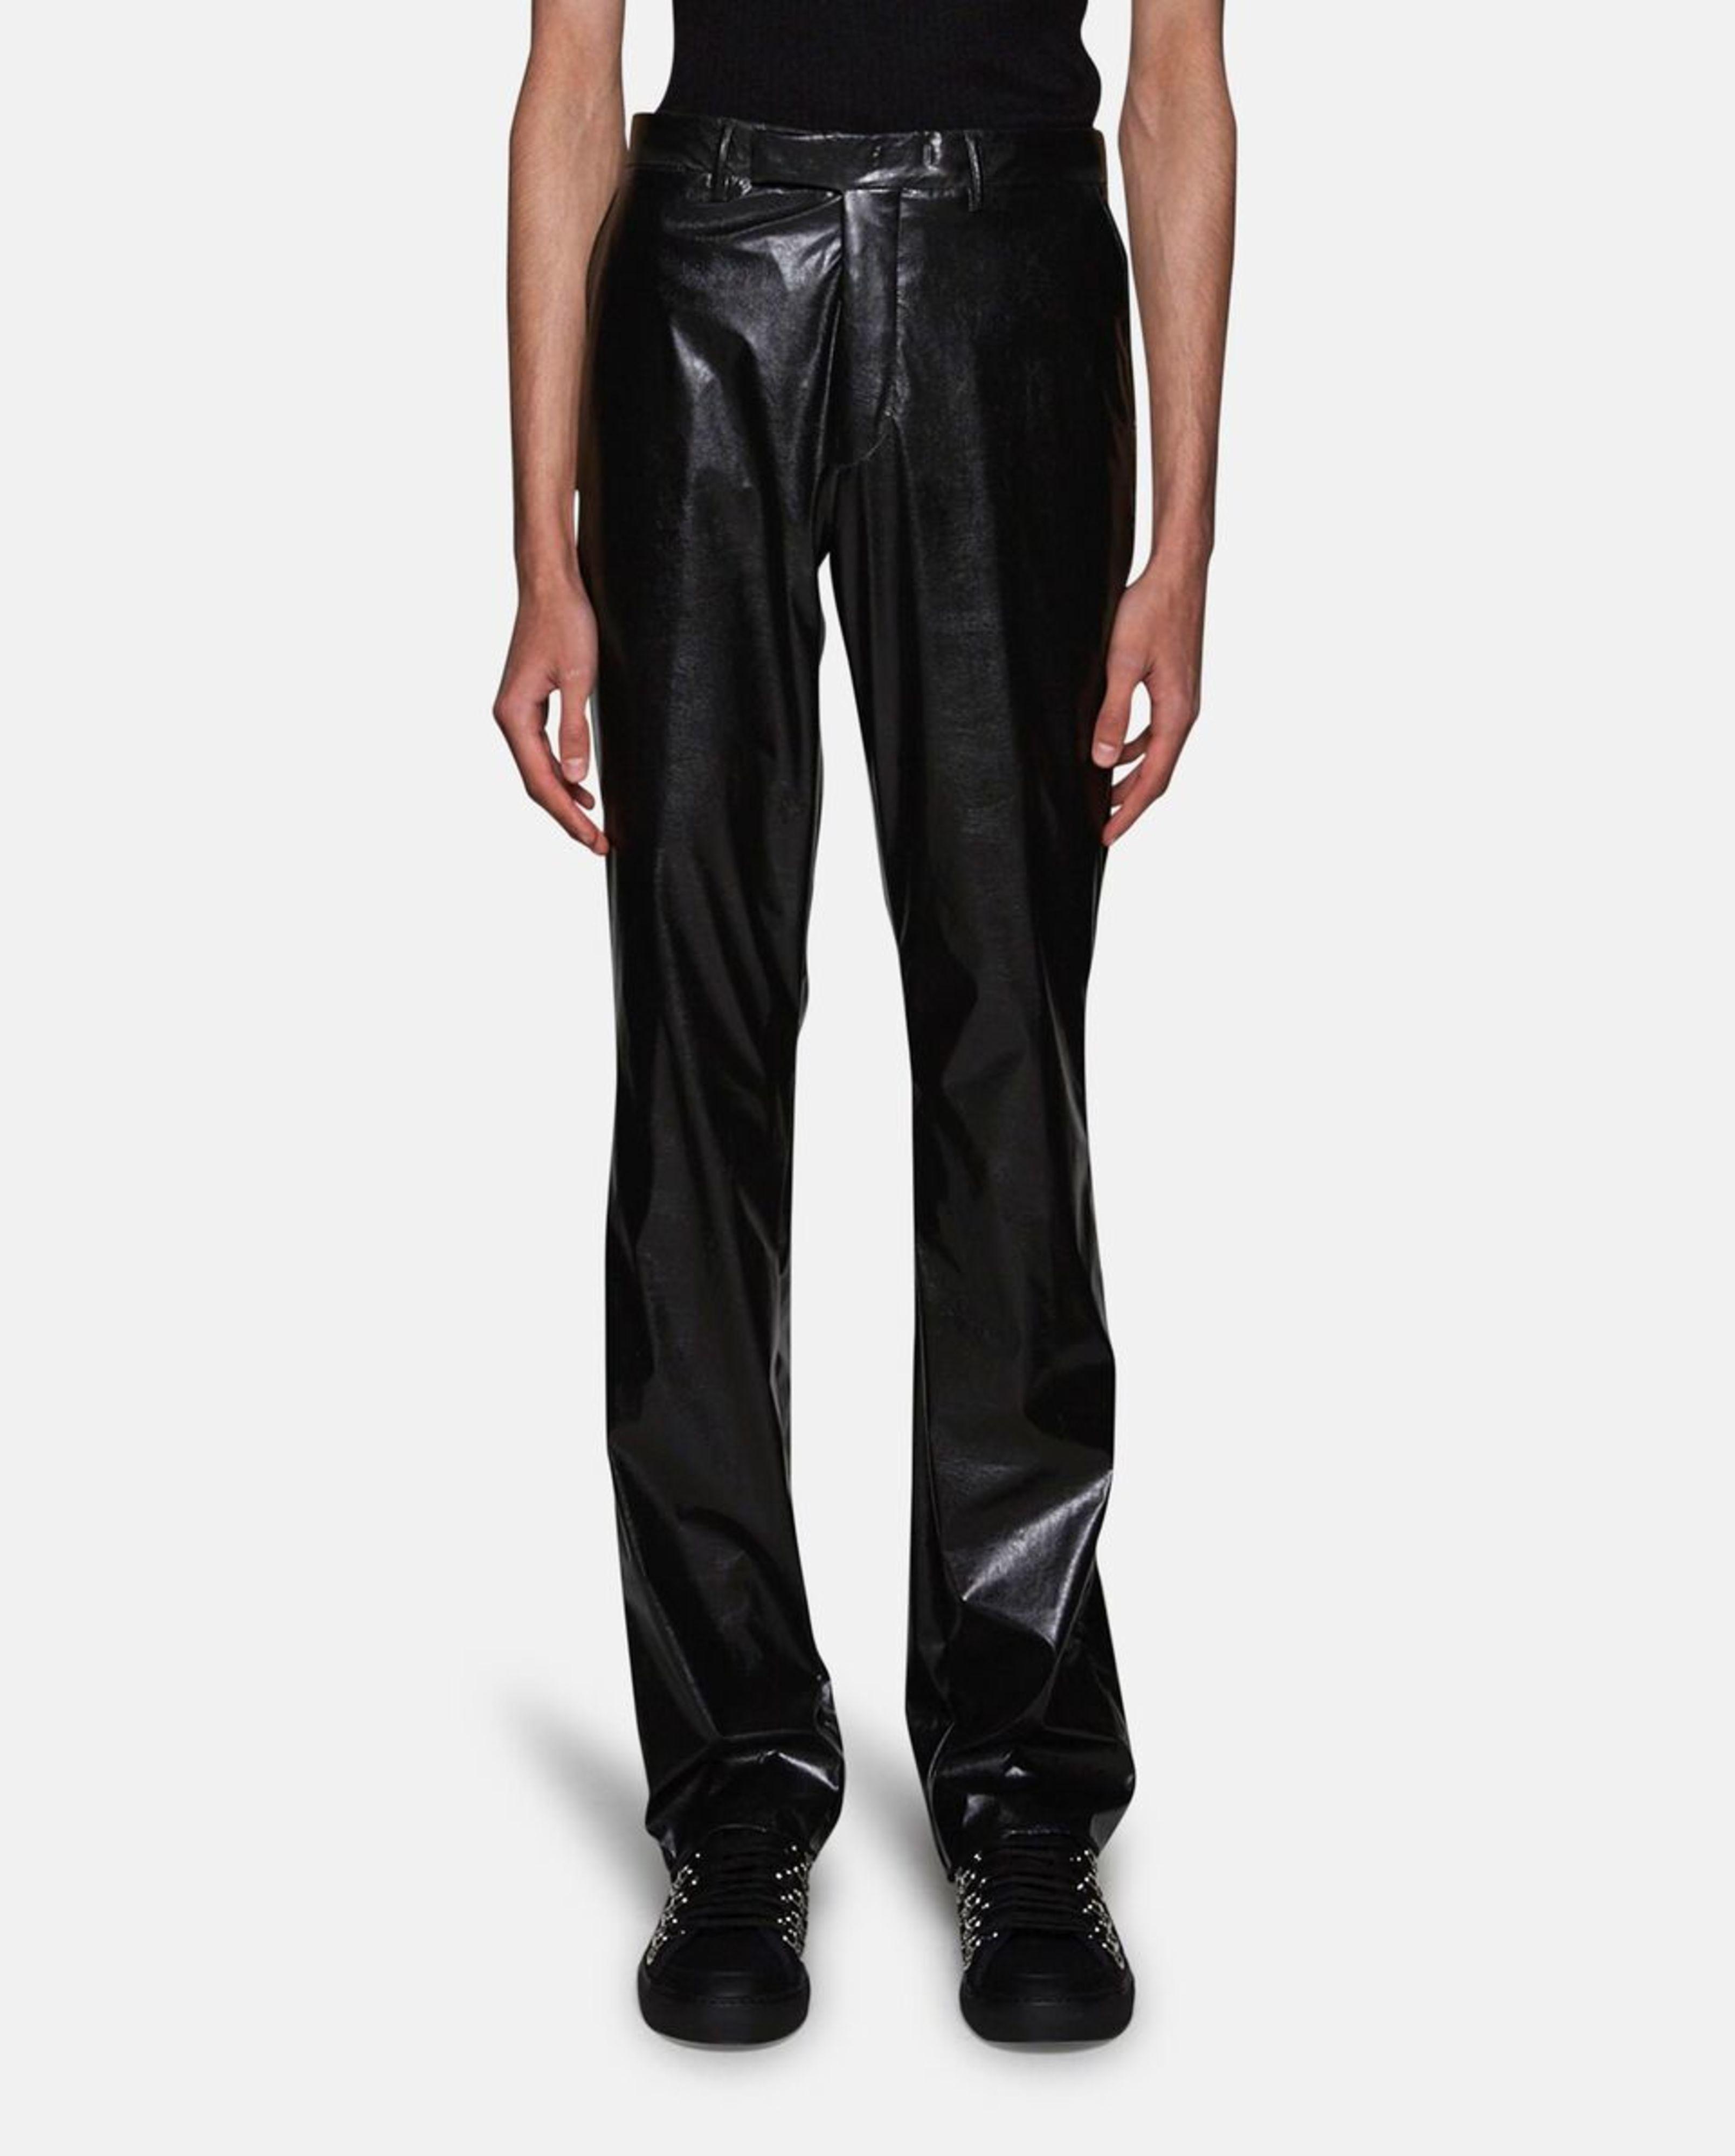 Lyst - Raf Simons Slightly Flary Fake Leather Pants in Black